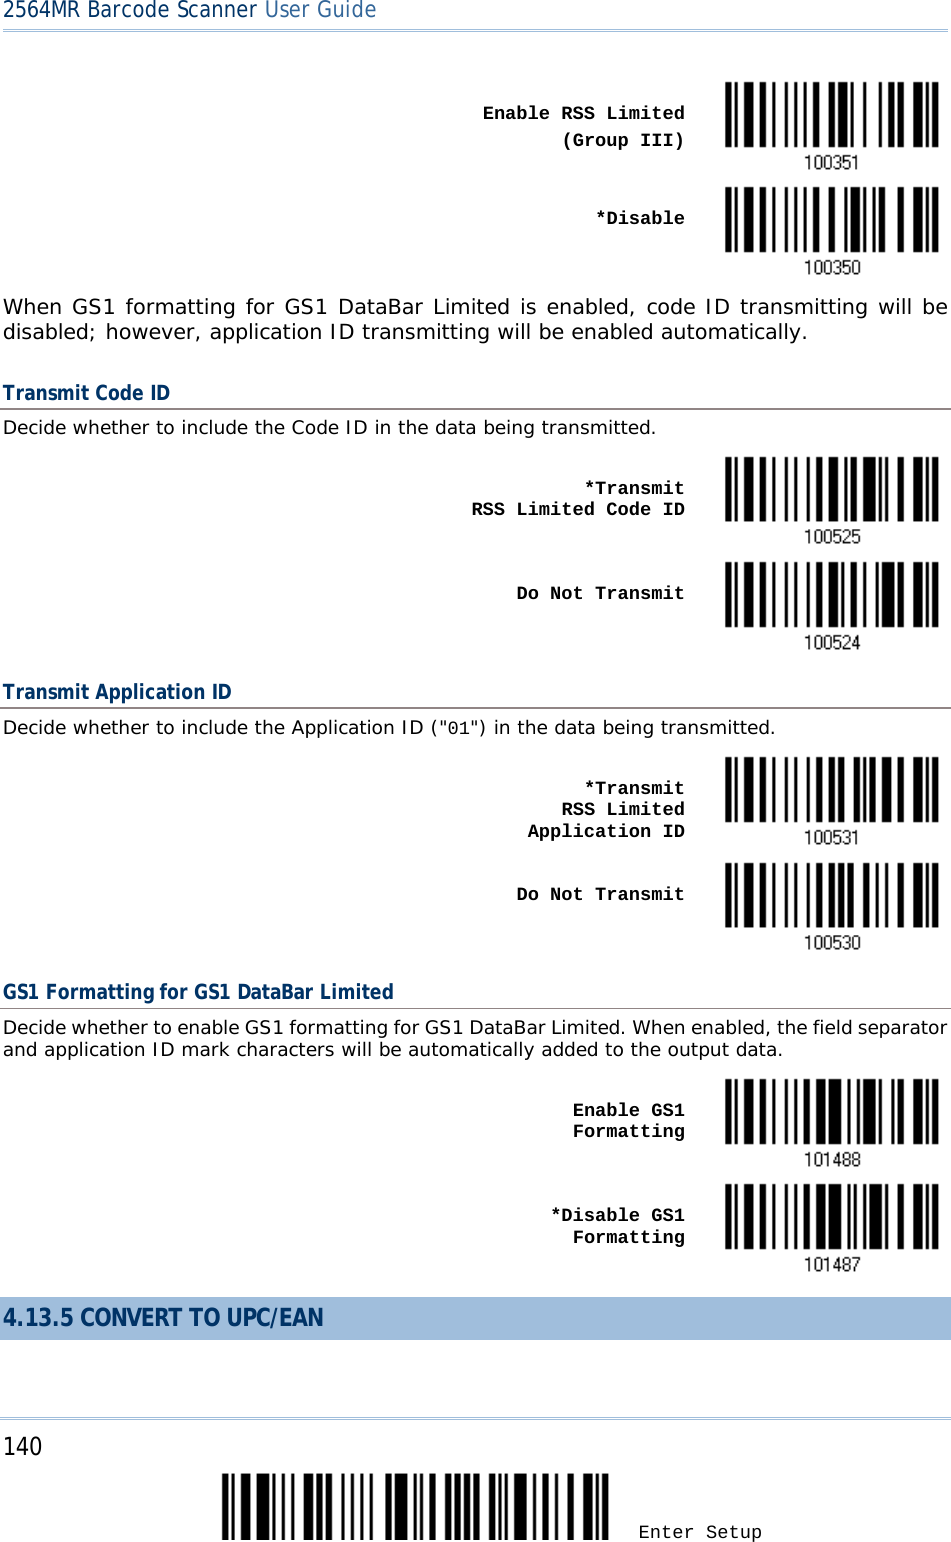 2564MR Barcode Scanner User Guide     Enable RSS Limited (Group III)     *Disable  When GS1 formatting for GS1 DataBar Limited is enabled, code ID transmitting will be disabled; however, application ID transmitting will be enabled automatically. Transmit Code ID Decide whether to include the Code ID in the data being transmitted.    *Transmit         RSS Limited Code ID     Do Not Transmit  Transmit Application ID Decide whether to include the Application ID (&quot;01&quot;) in the data being transmitted.    *Transmit         RSS Limited Application ID     Do Not Transmit  GS1 Formatting for GS1 DataBar Limited Decide whether to enable GS1 formatting for GS1 DataBar Limited. When enabled, the field separator and application ID mark characters will be automatically added to the output data.    Enable GS1 Formatting     *Disable GS1 Formatting  4.13.5 CONVERT TO UPC/EAN 140 Enter Setup 